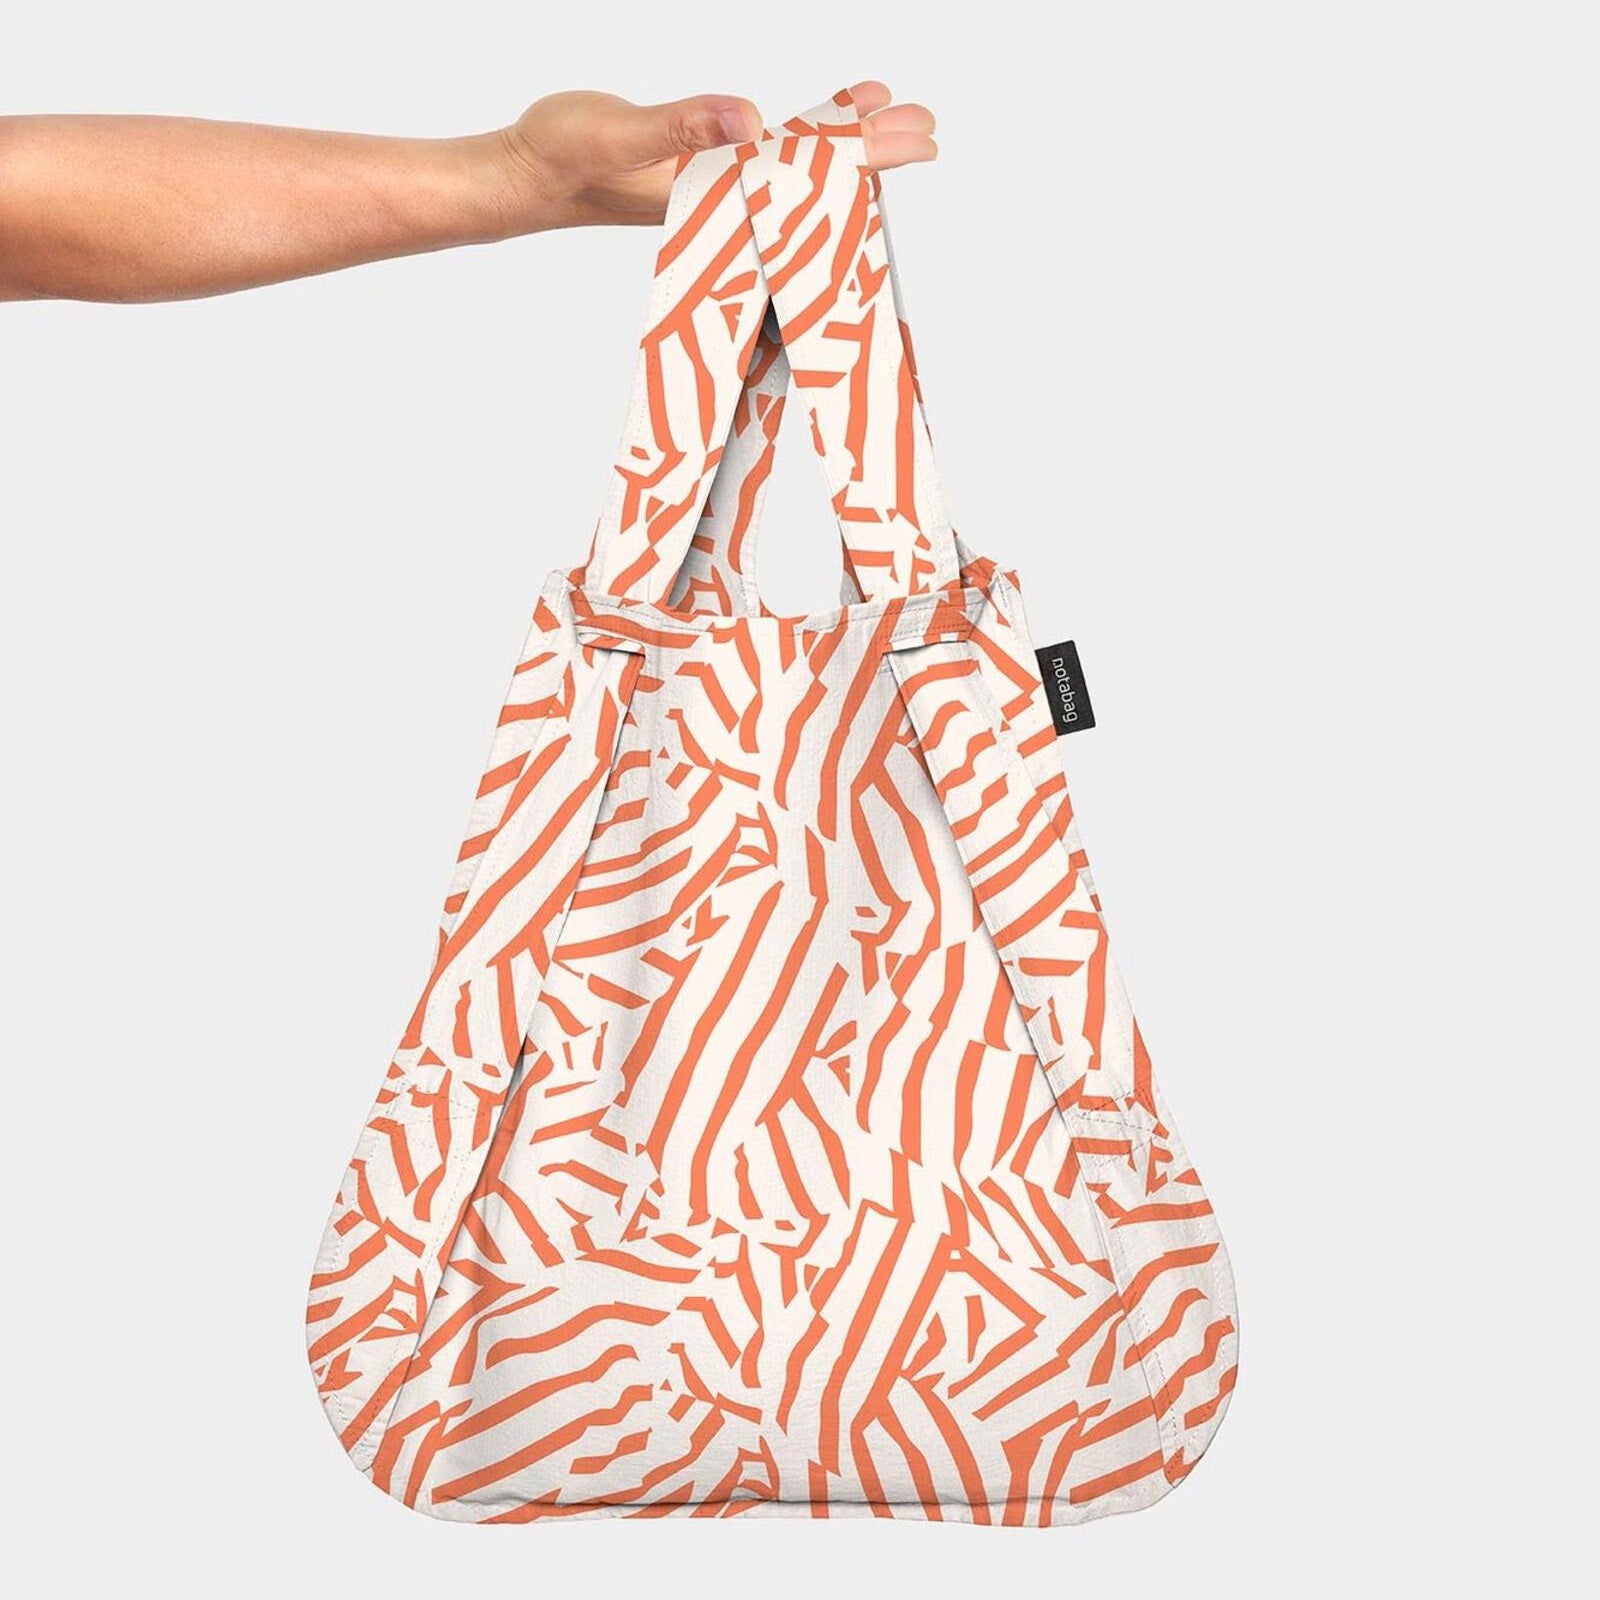 Peach Twist Convertible Backpack Tote by Notabag